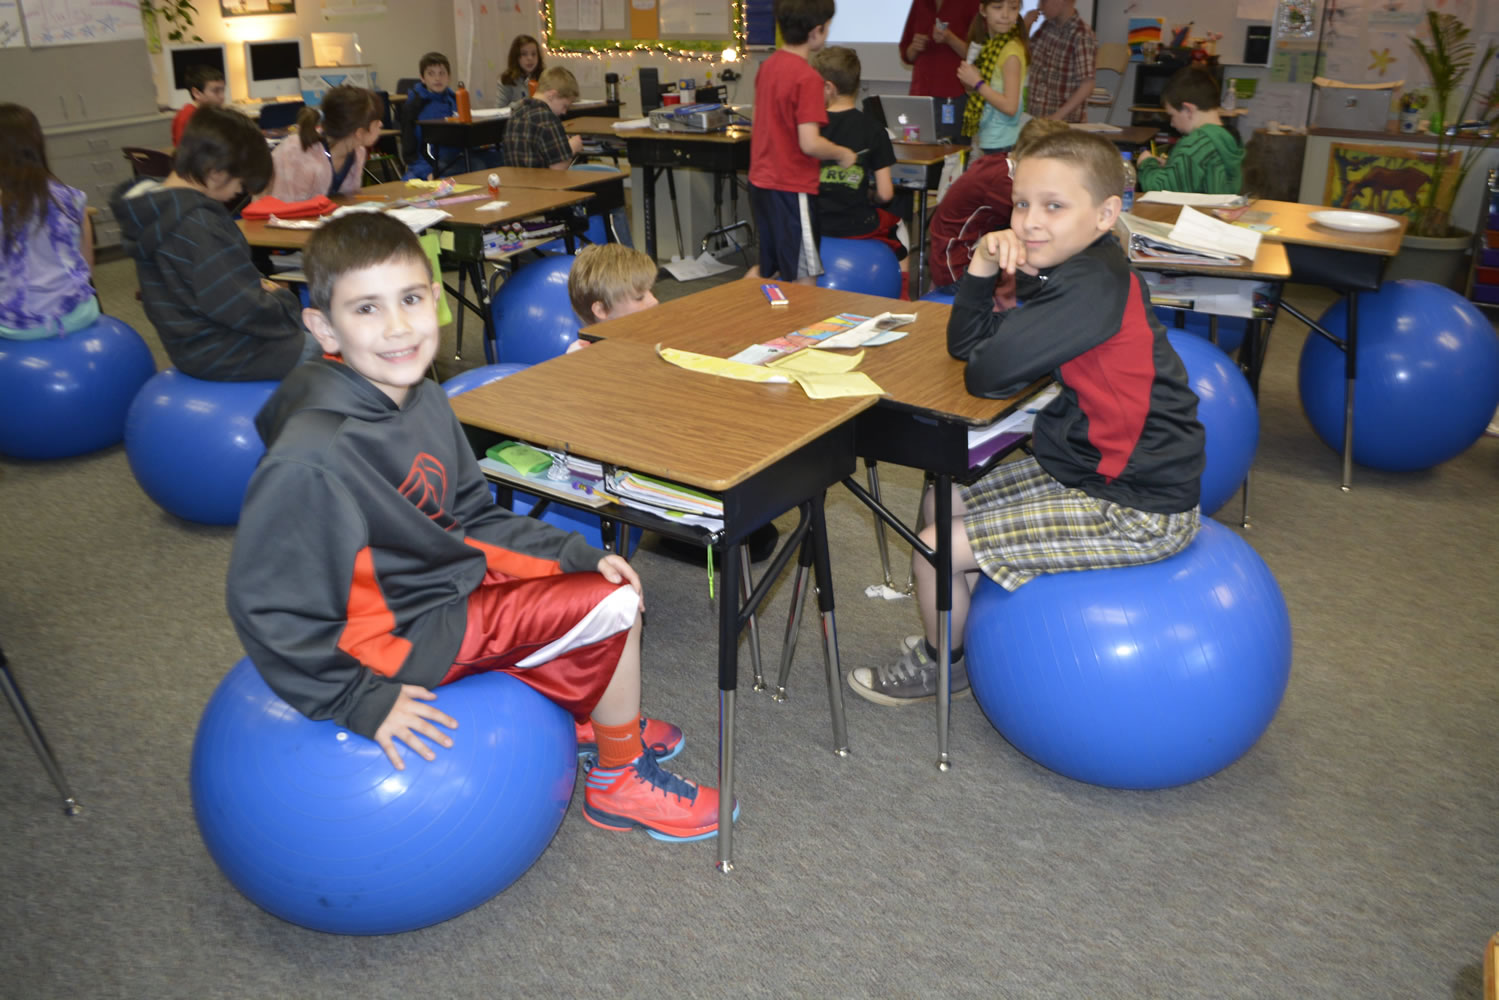 Aiden Baalaer (left) and Christian Smith enjoy using the new stability balls in their fourth-grade classroom at Cape Horn-Skye Elementary School in Washougal.